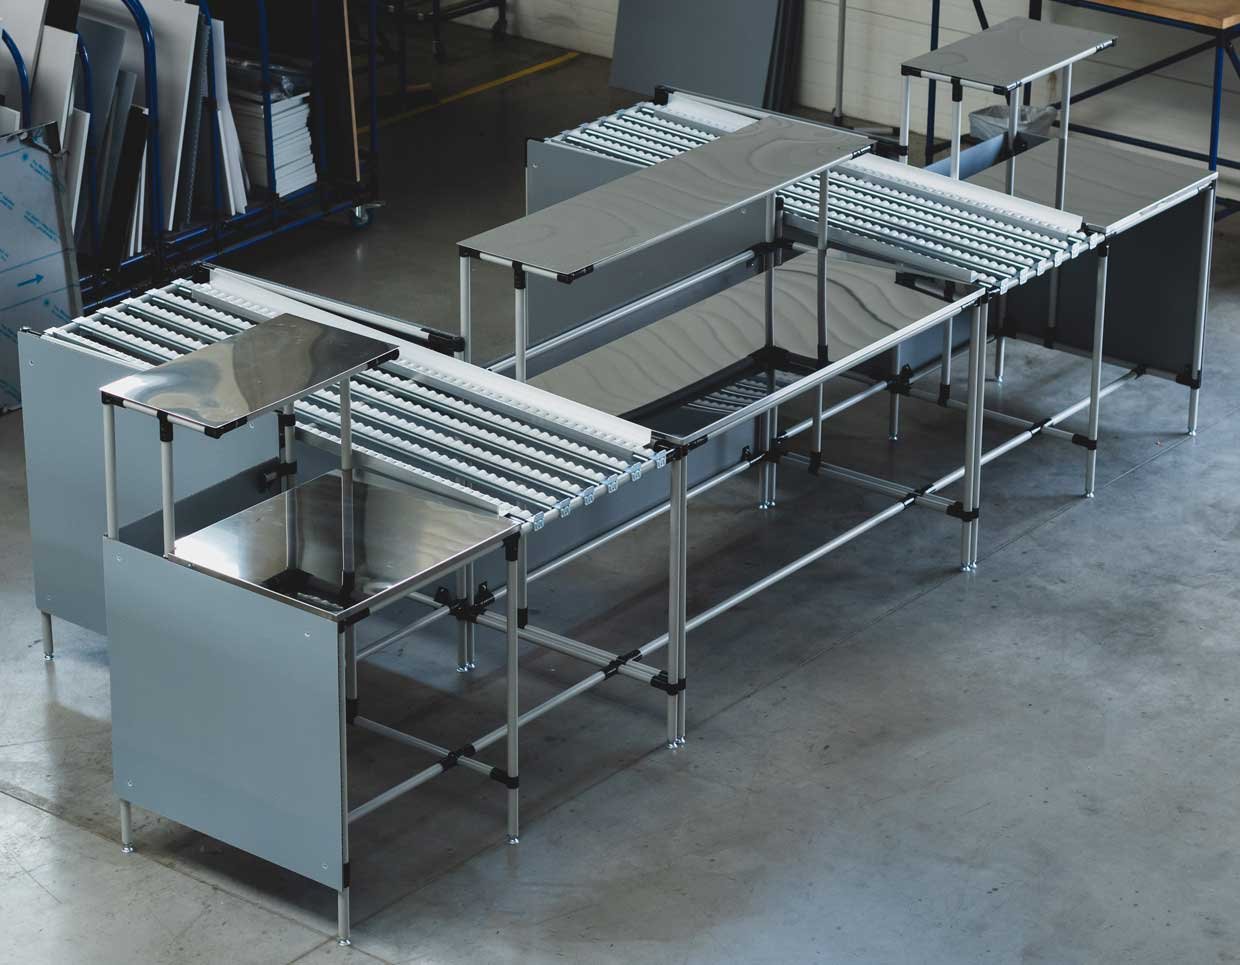 Assembly line with stainless steel-encased work surface and FIFO roller conveyors